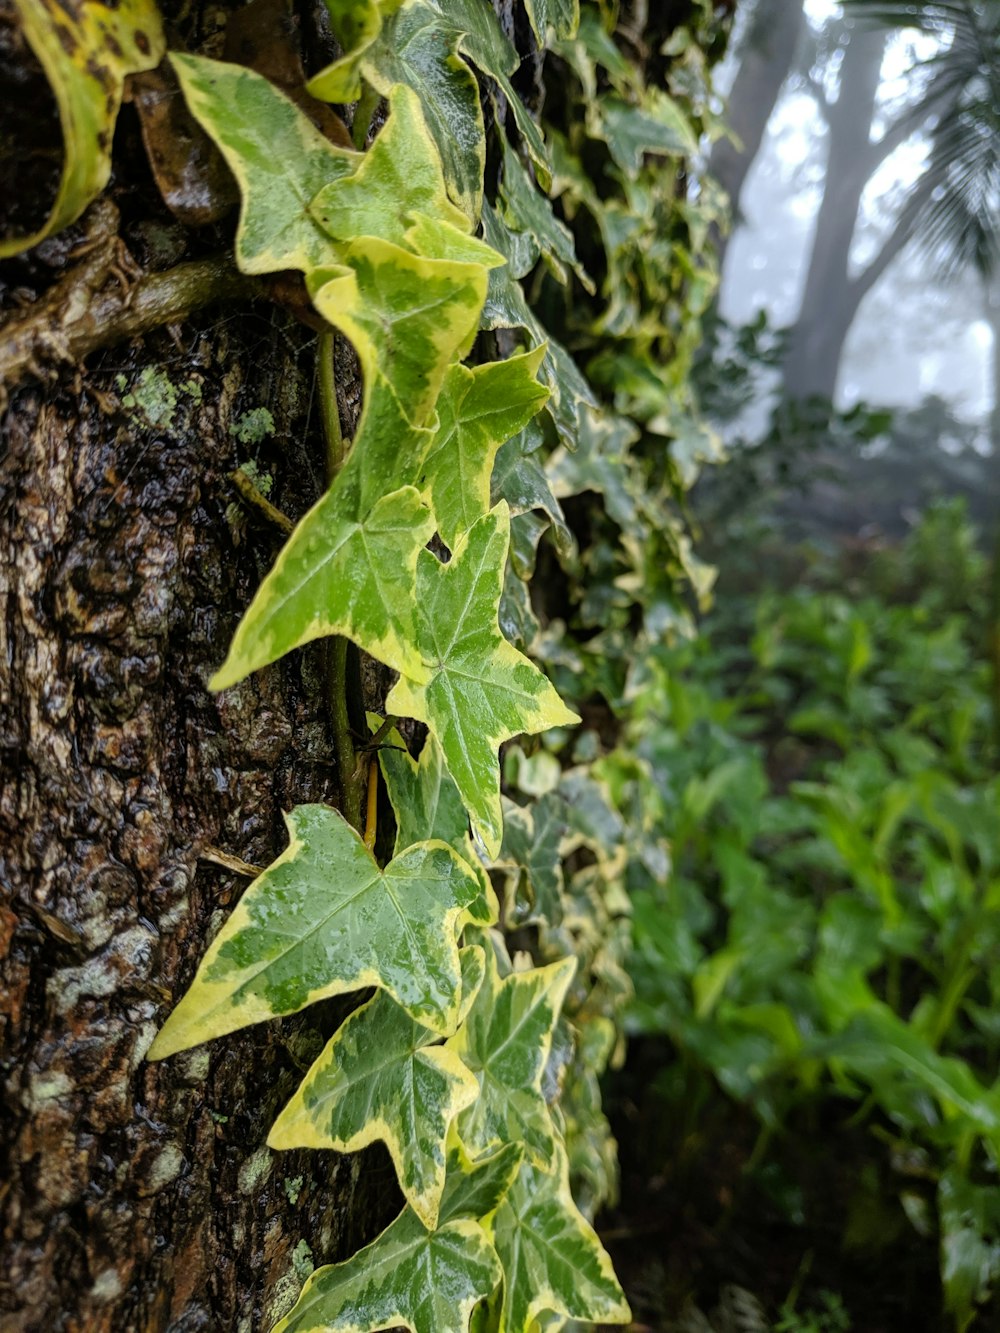 ivy growing on the side of a tree trunk